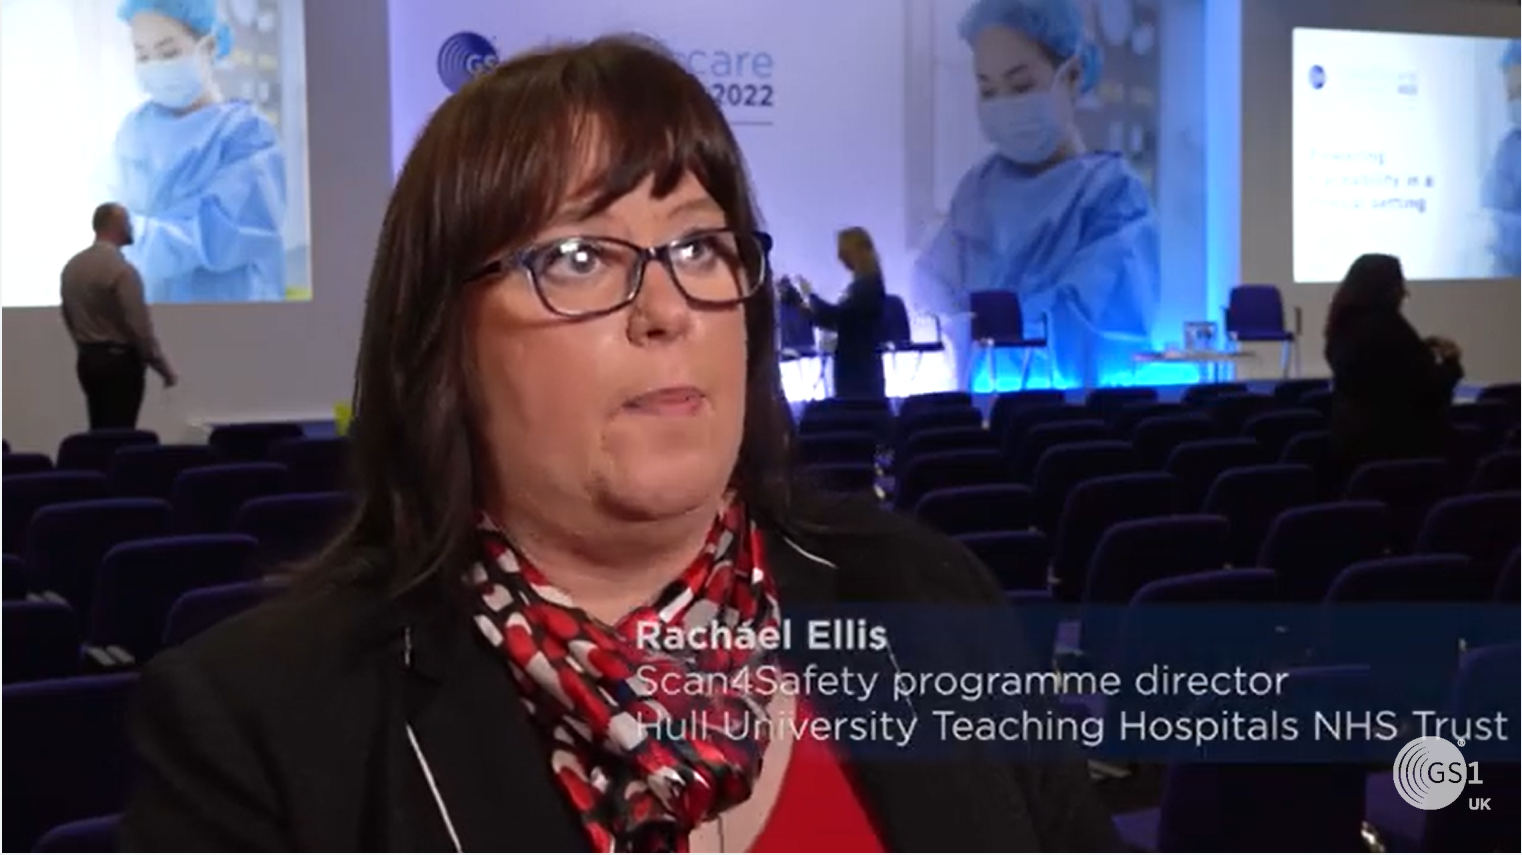 Rachel Ellis being interviewed at a GS1 conference